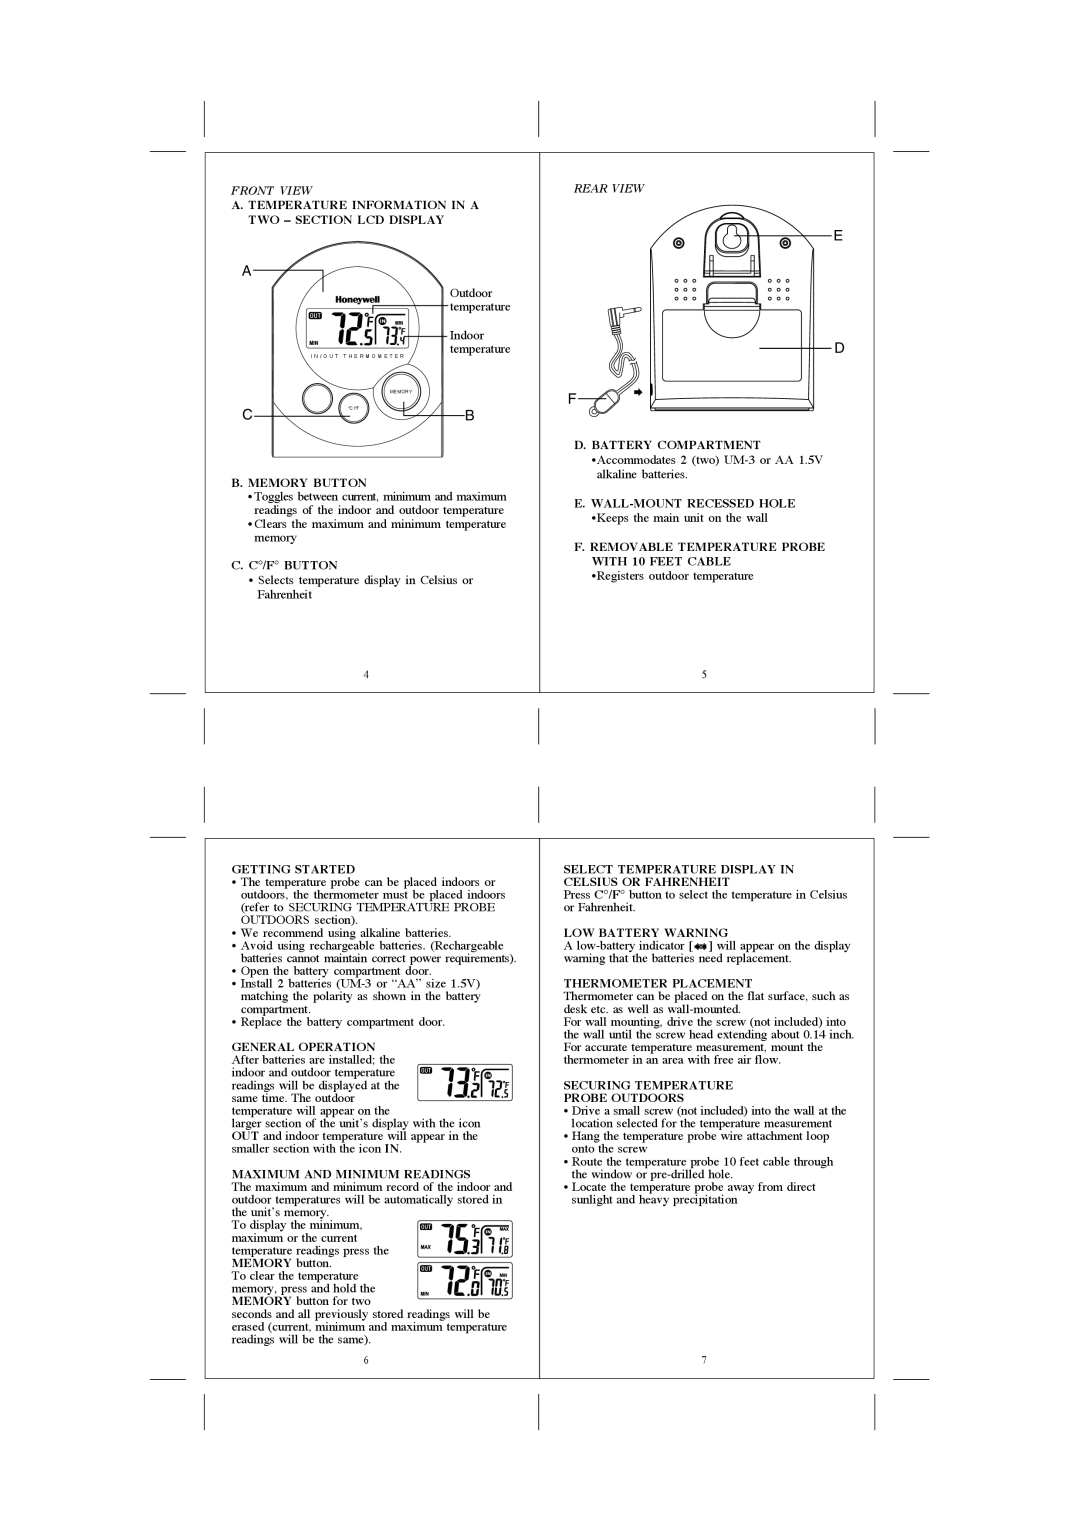 Honeywell TM001 user manual Front View, Rear View, E D F 